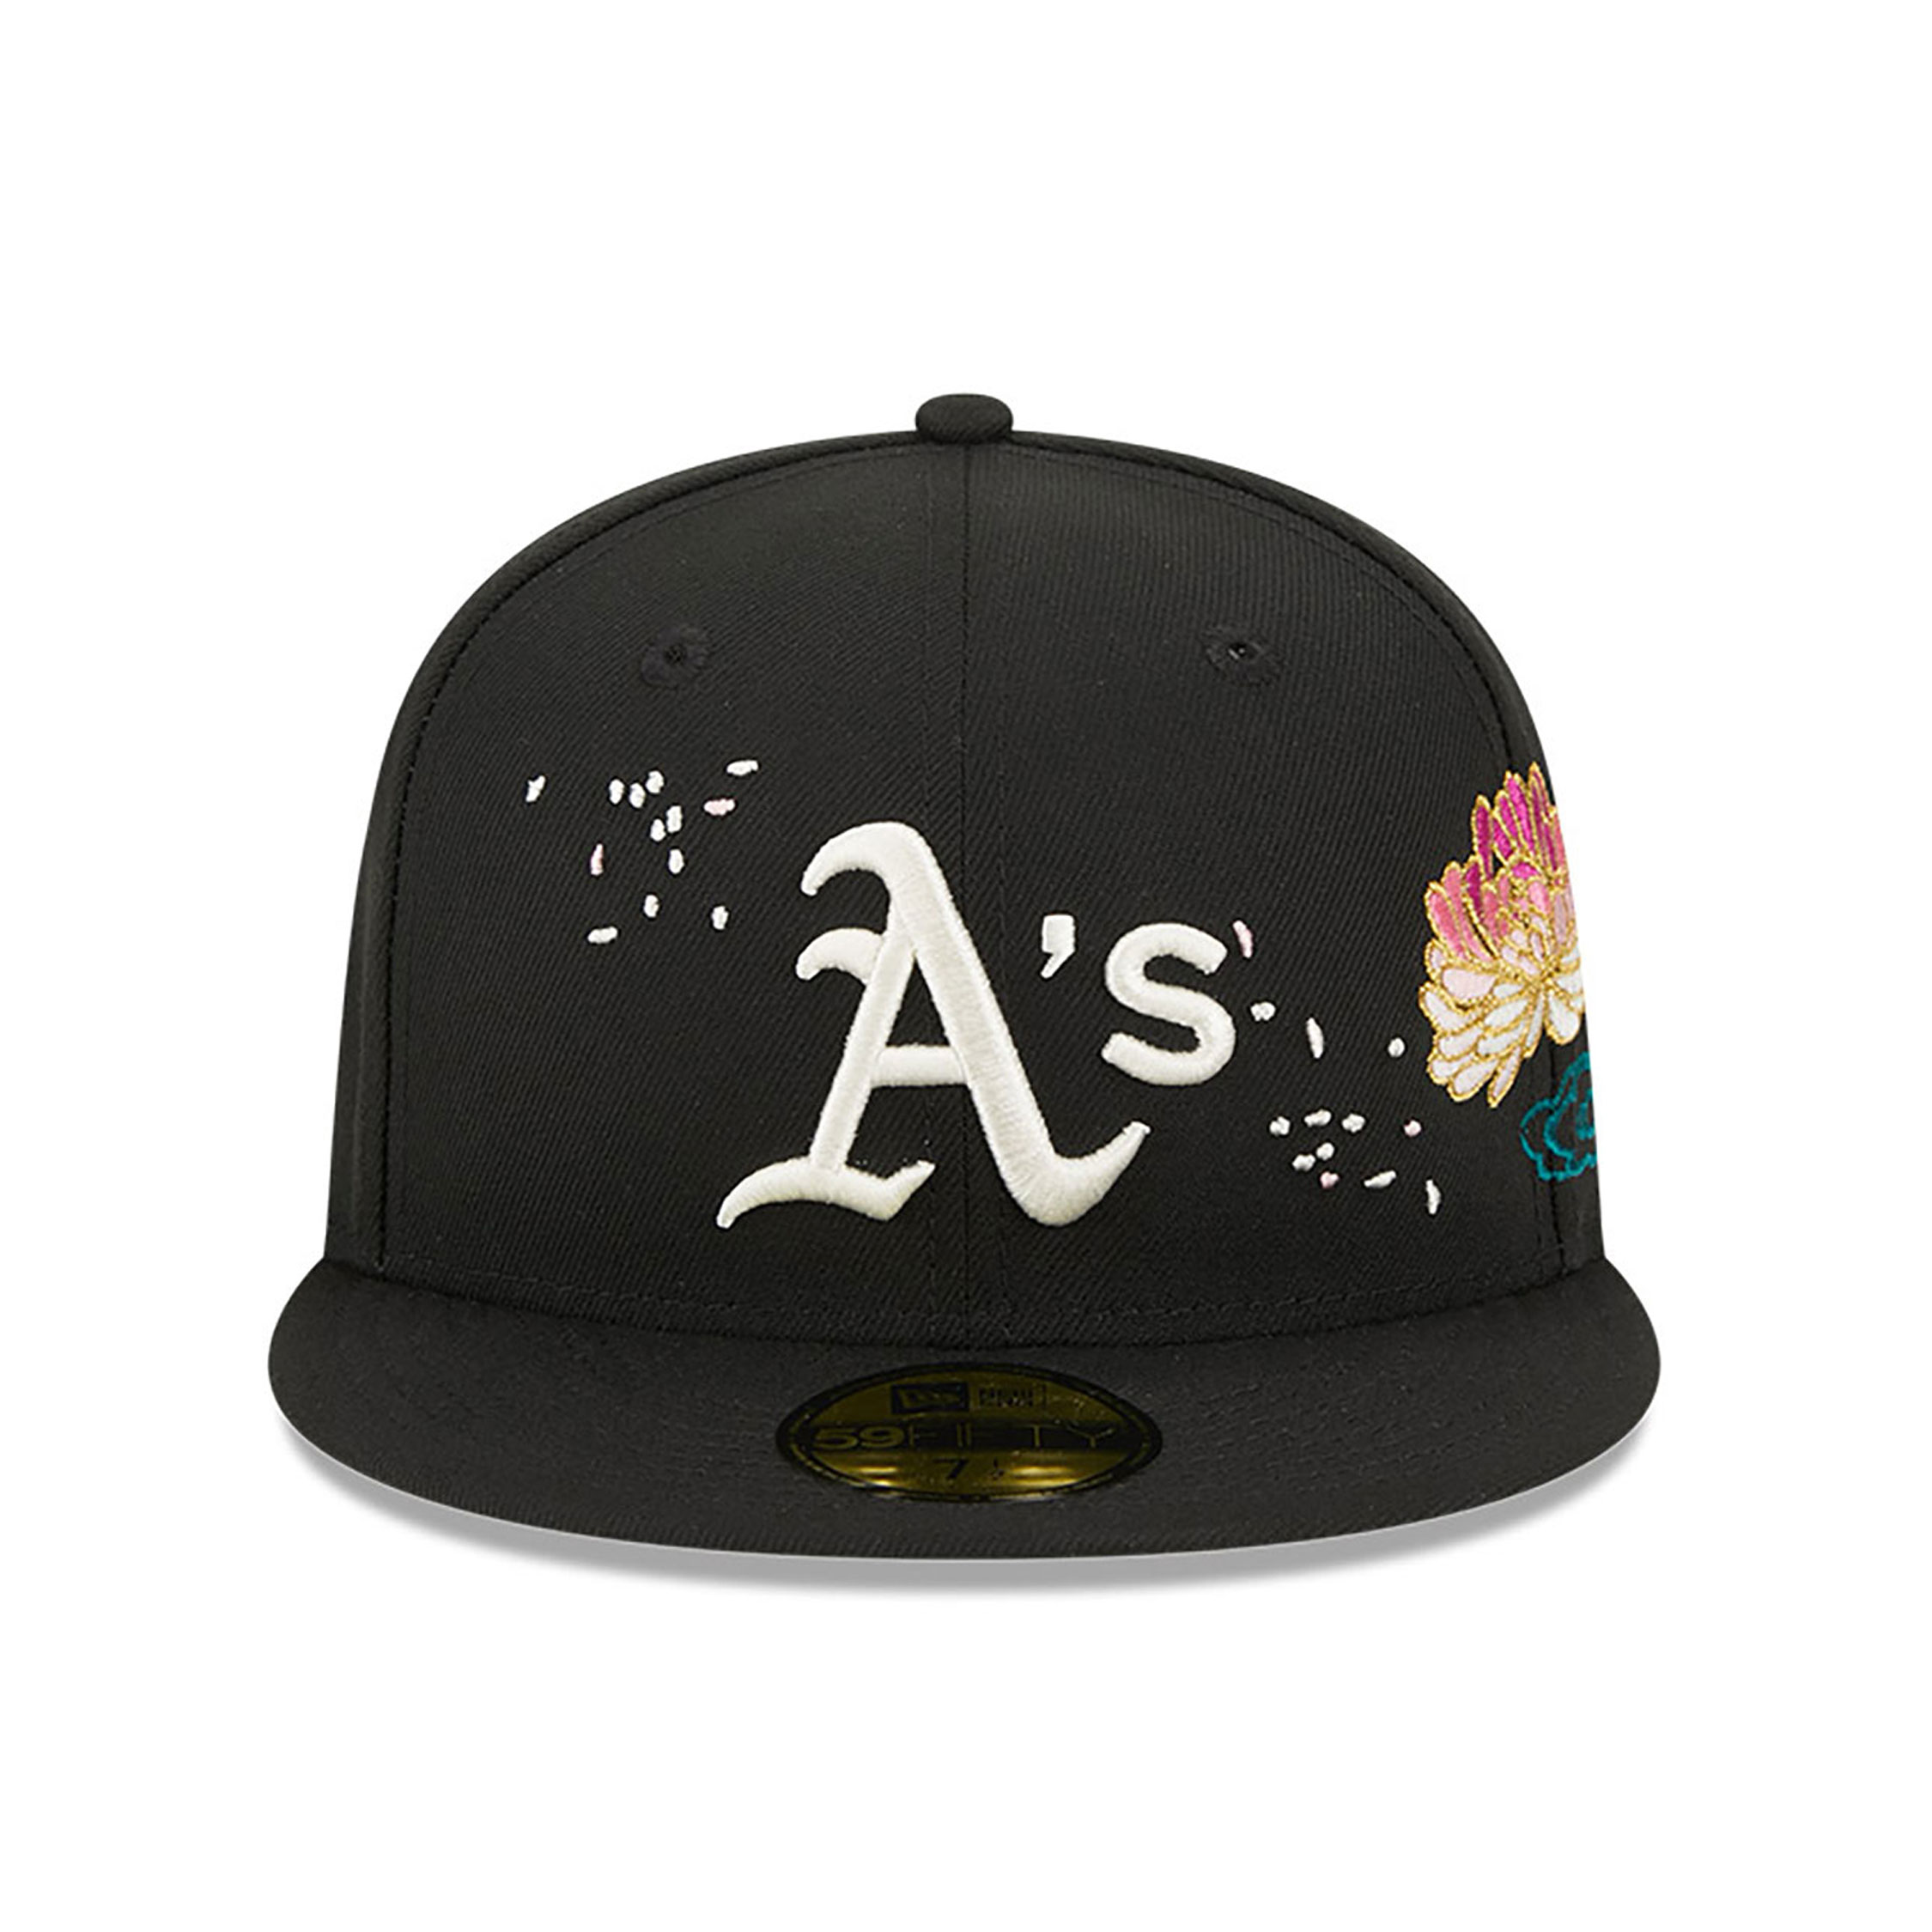 Oakland Athletics Cherry Blossom Black 59FIFTY Fitted Cap